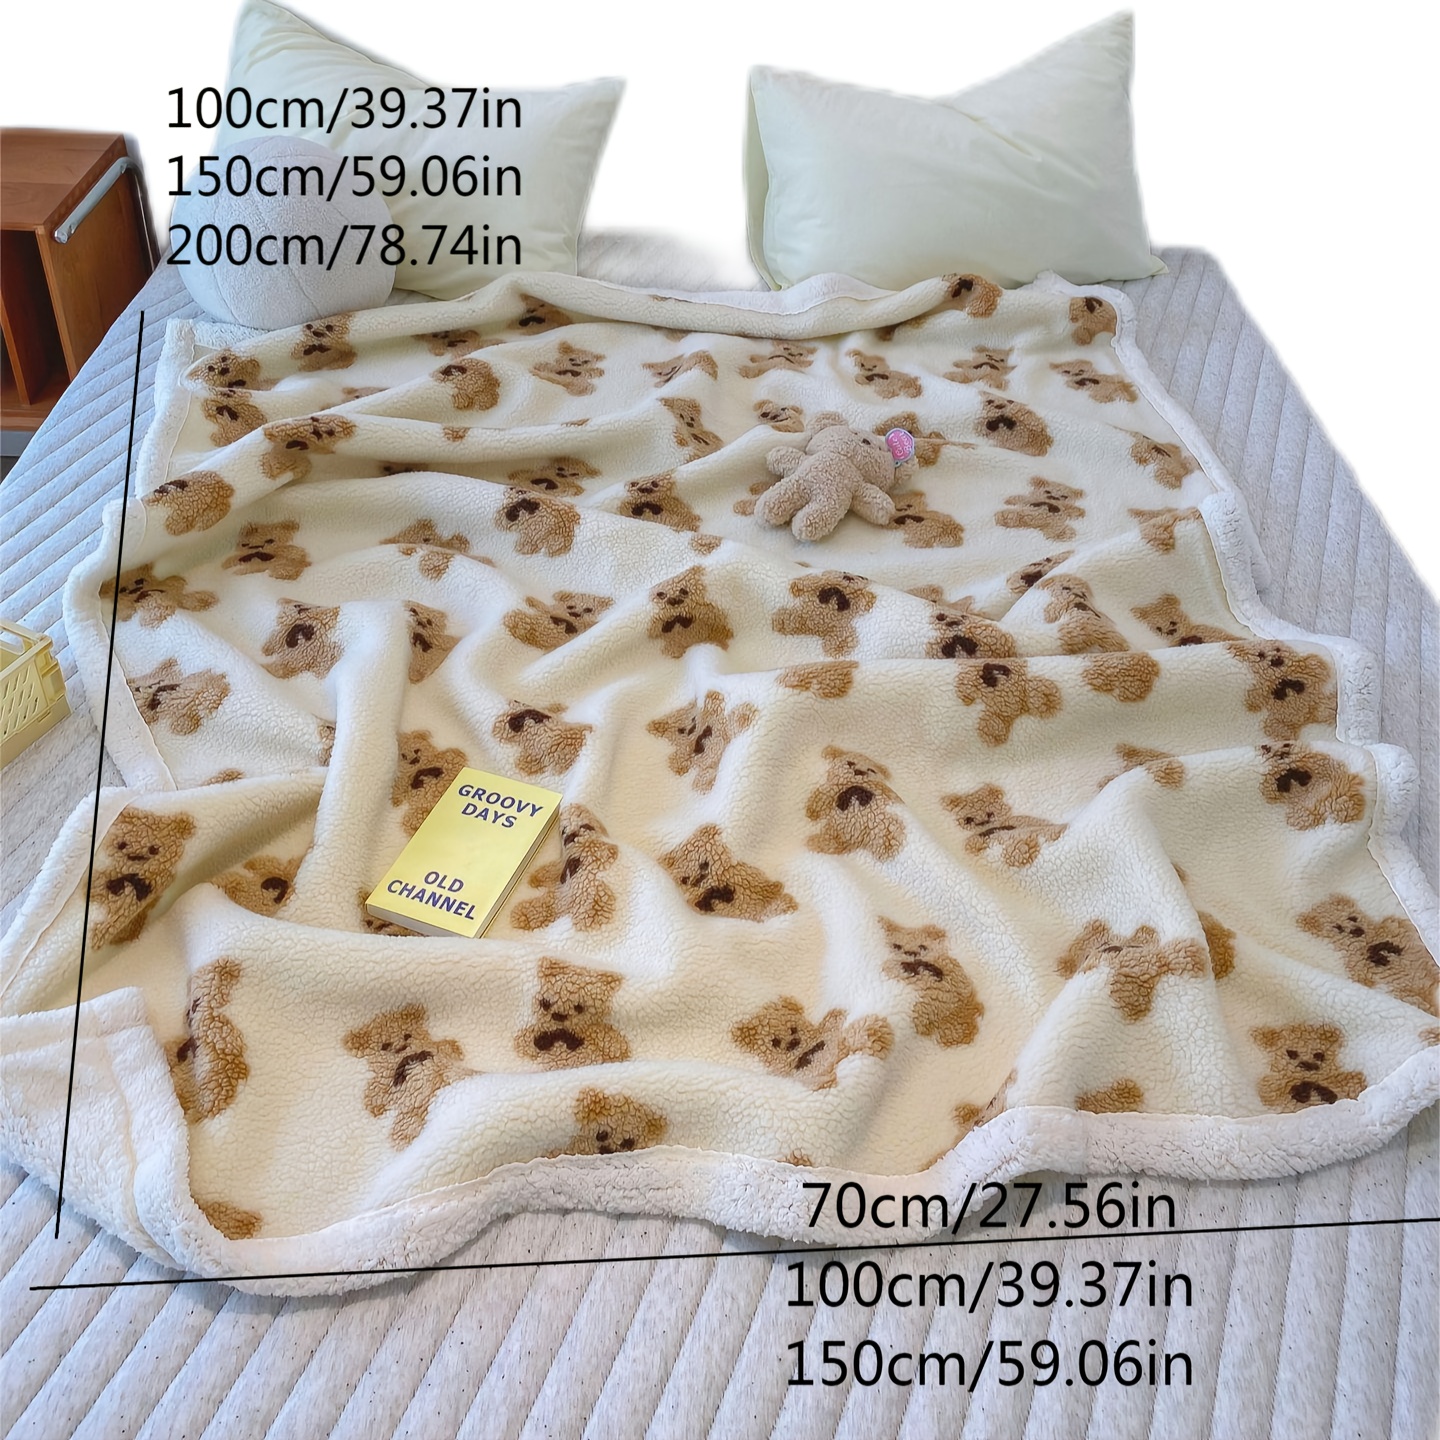 

1pc Cartoon Bear Print Sherpa Blanket, Soft Warm Throw Blanket Nap Blanket For Couch Sofa Office Bed Camping Travel, Multi-purpose Gift Blanket For All Season